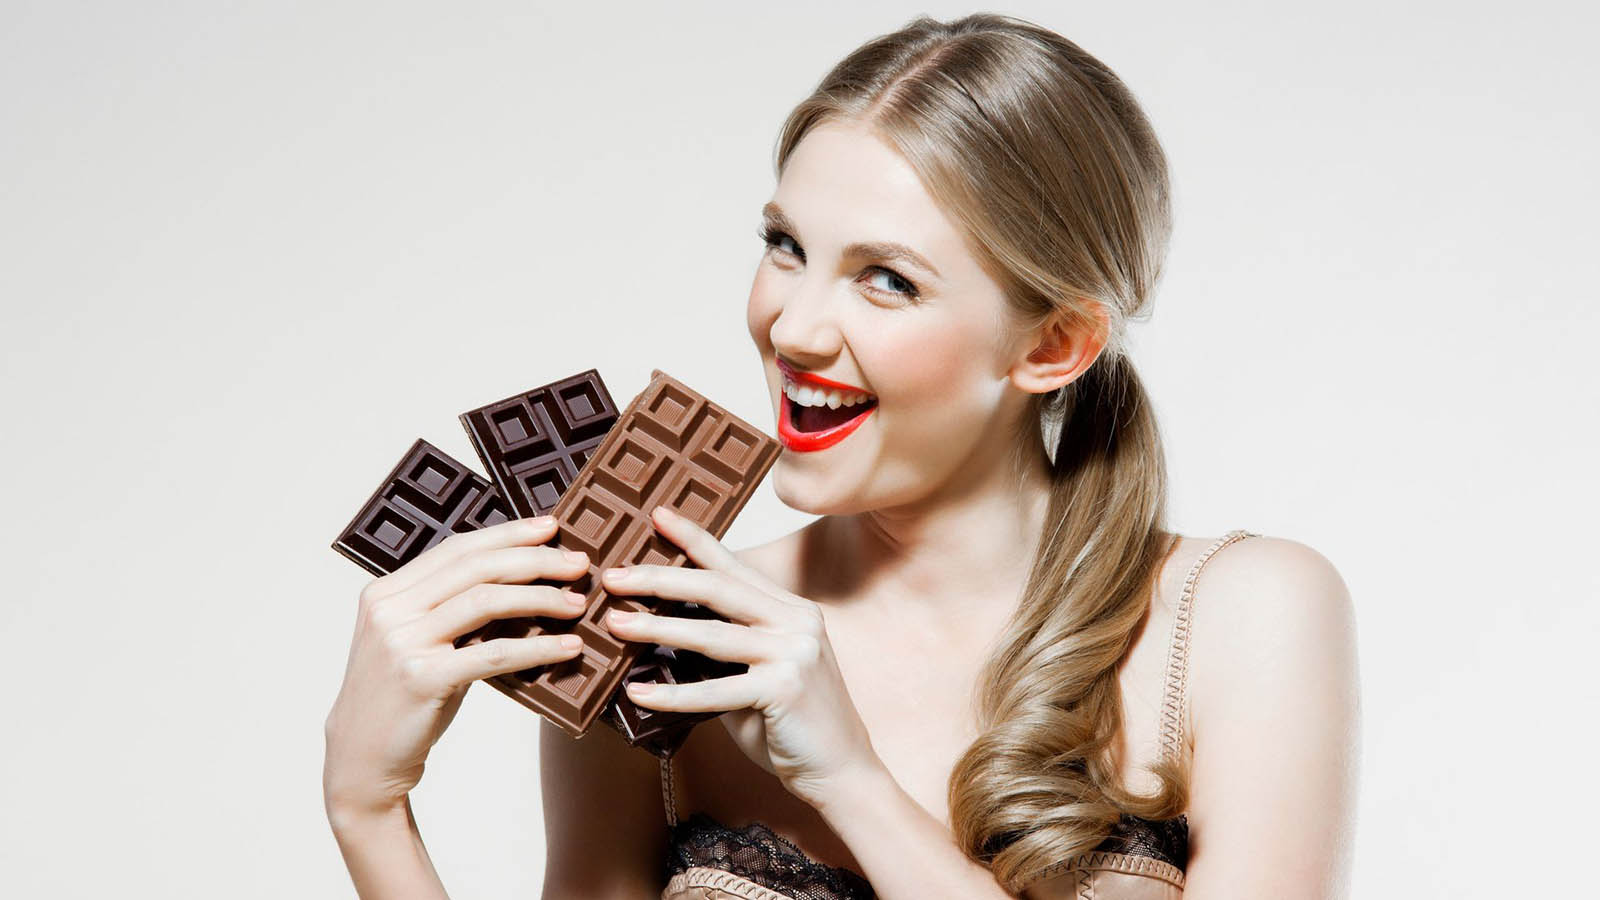 If You Get More Than 12/15 on This General Knowledge Quiz, You Are Too Smart Woman Eating Chocolate Bars